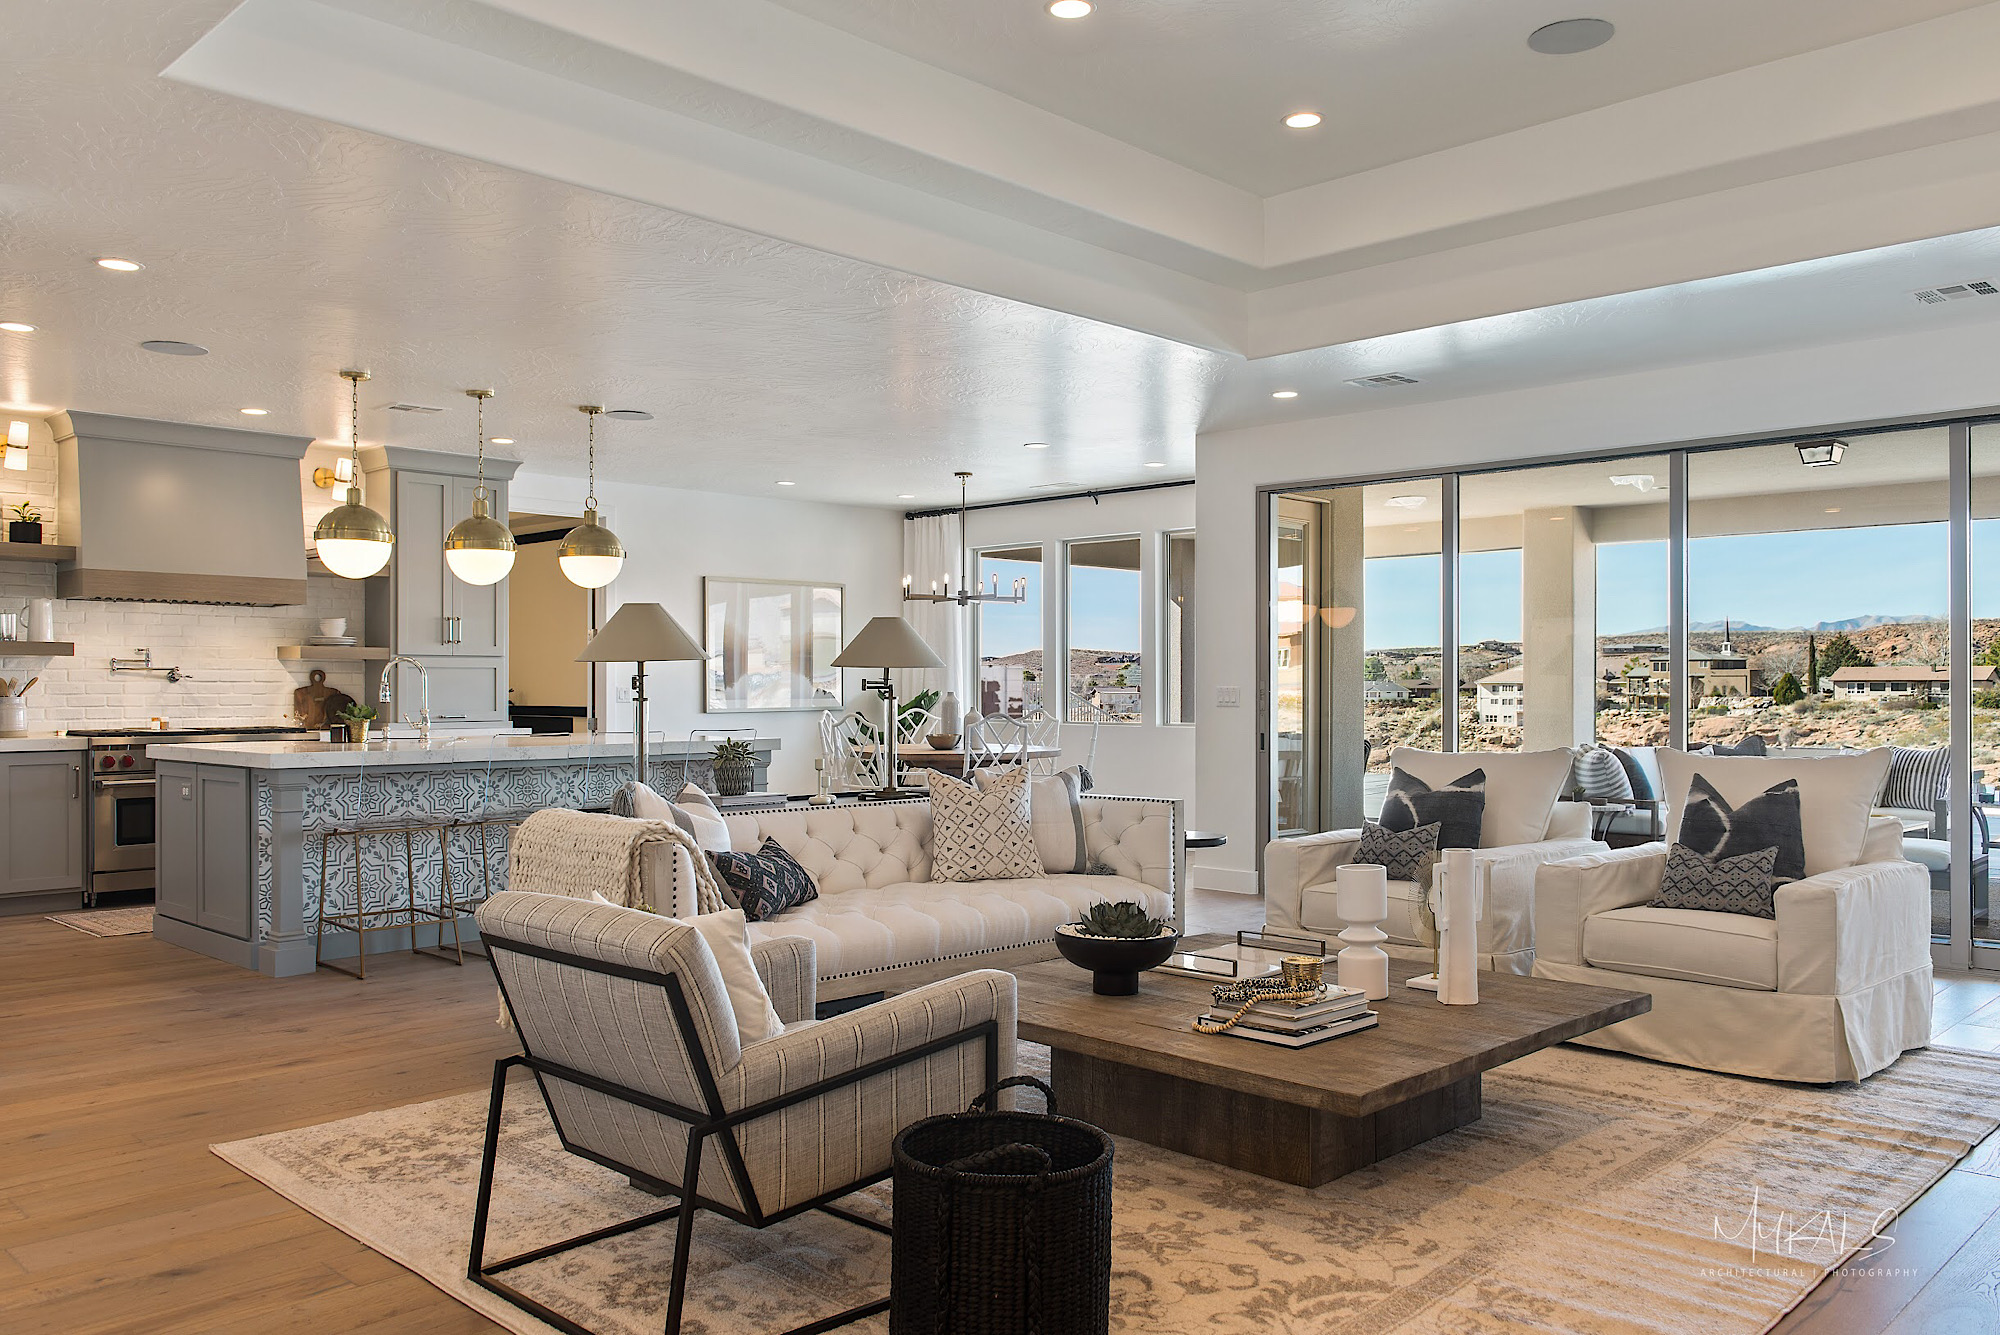 St. George Area Parade of Homes returns with 30 extraordinary homes, new  virtual experience – St George News